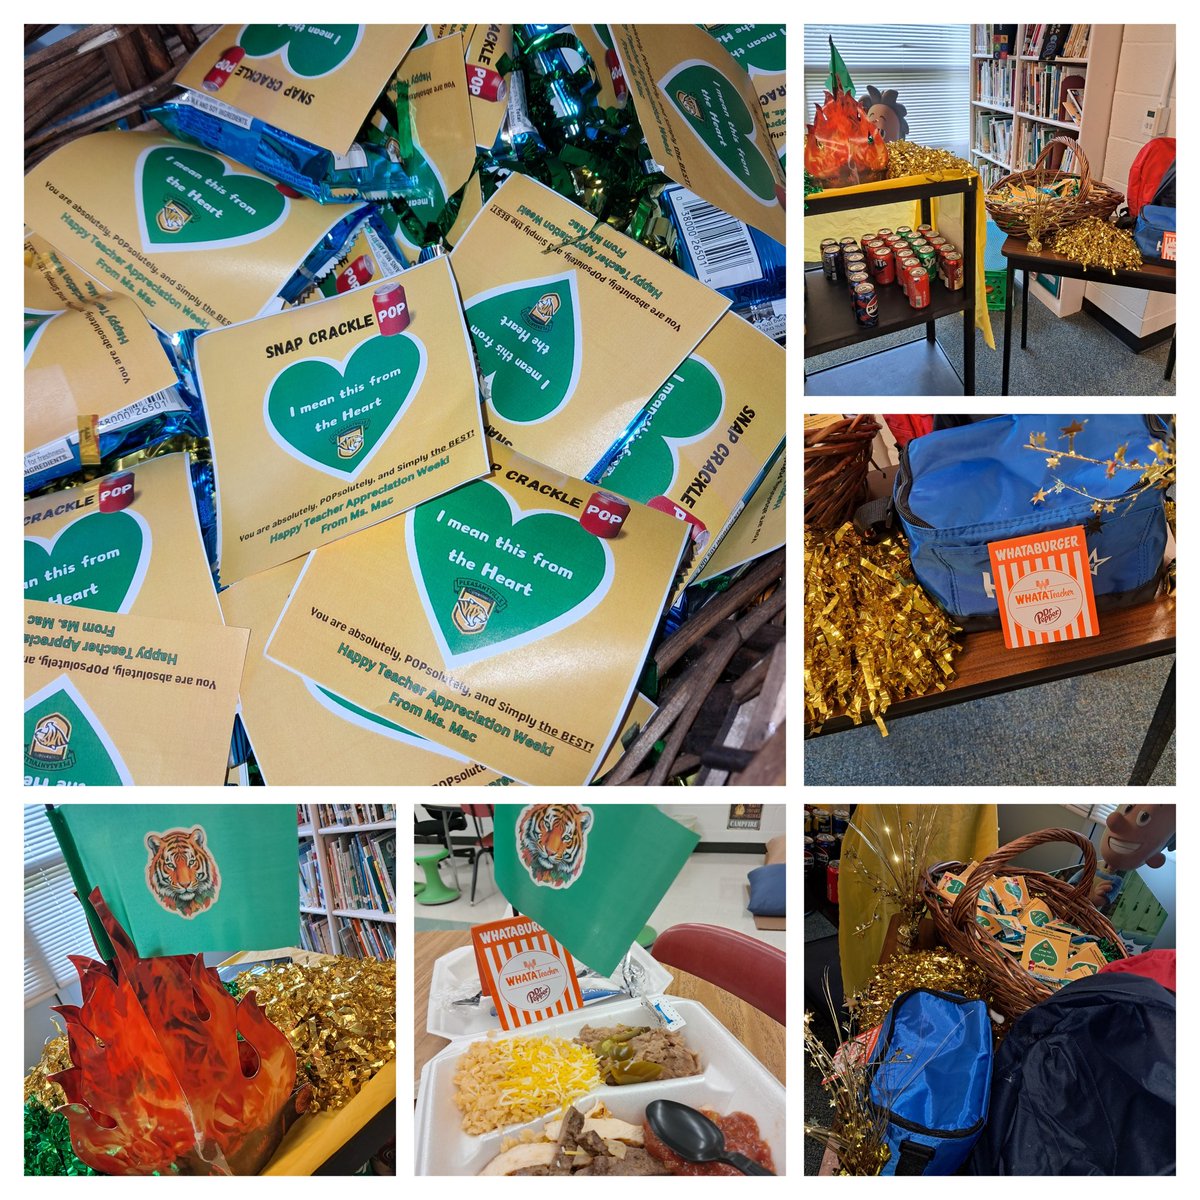 1st day #TeacherApppreciationWeek was filling with complimentary lunch from Principal @ArymasRay & surprise treats and gifts b4 our faculty meeting to 3 lucky teachers from counselor @McWisdom4Edu- Ms. Whitehead, Mrs. Perez & Mr. Harris. #DestinationExcellence 🐅💛💚